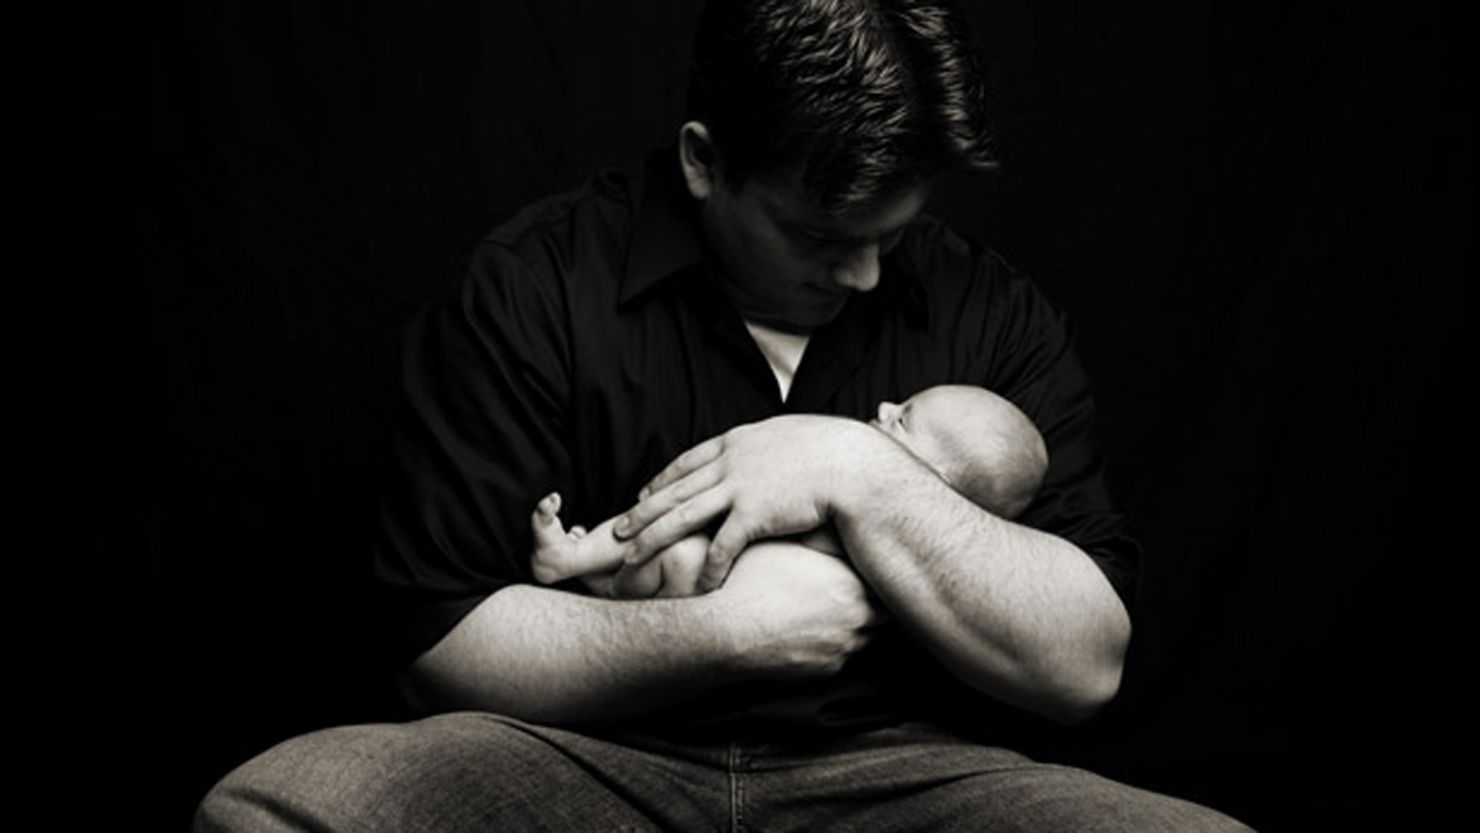 "Getting him to fall asleep in your arms is the dad skill sine qua non."